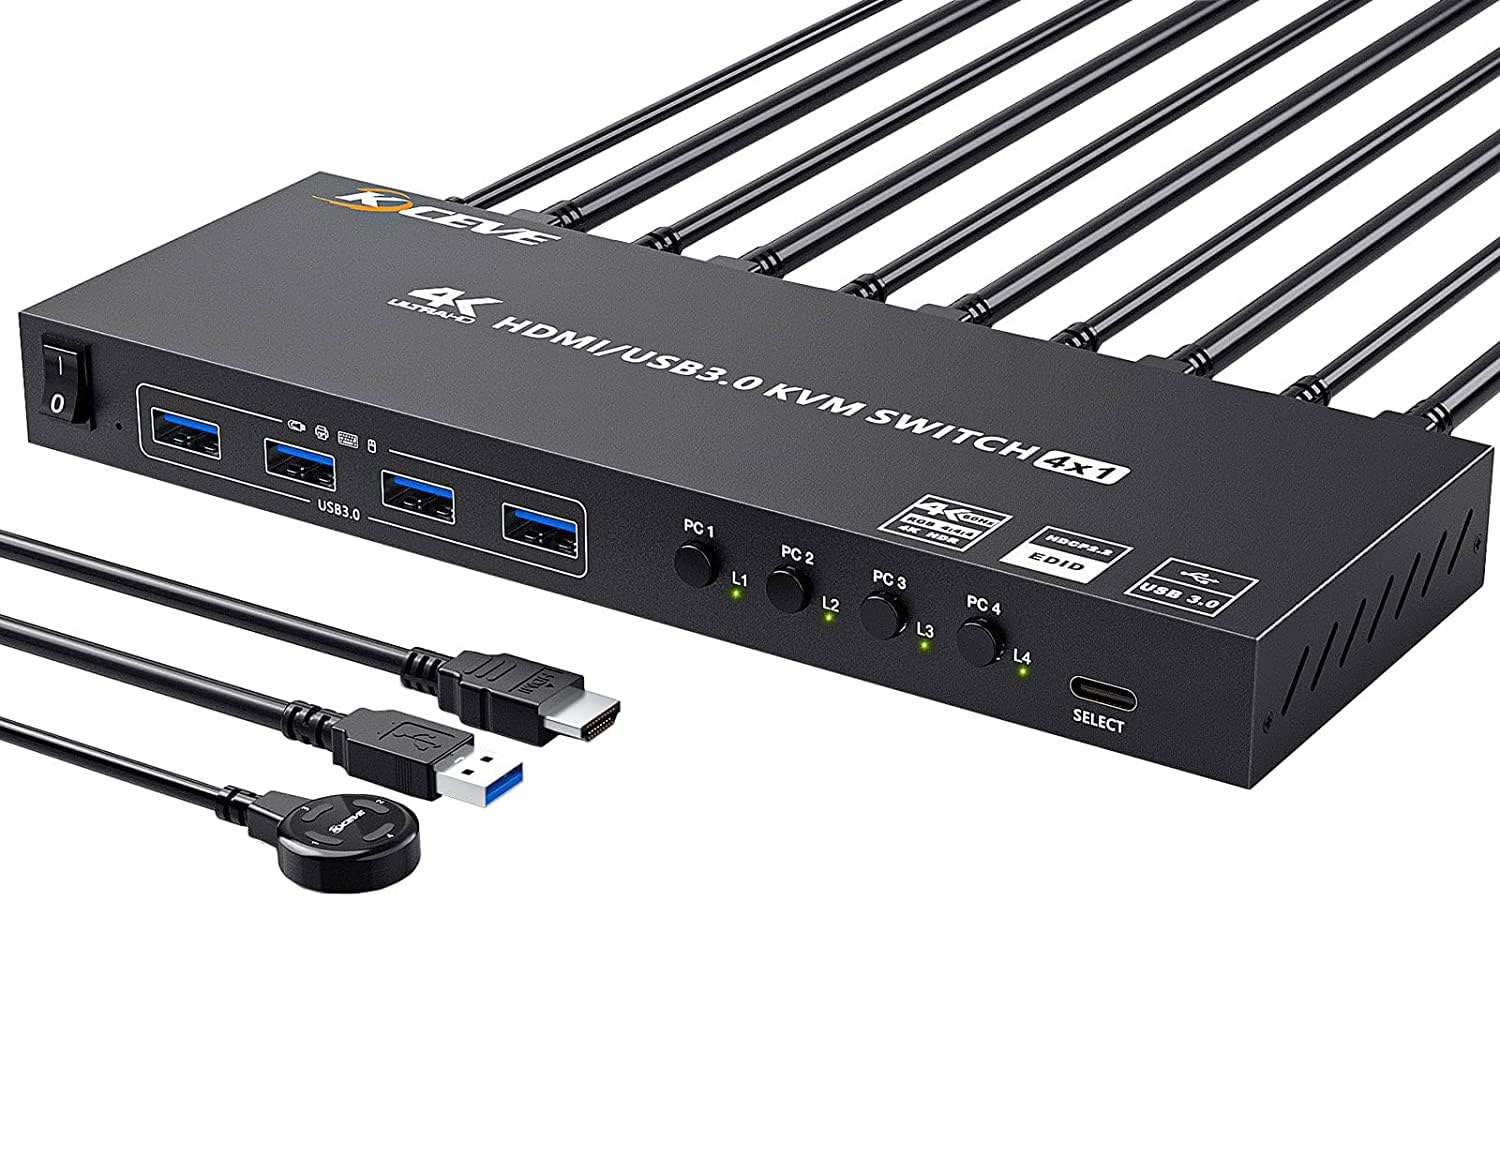 USB 3.0 HDMI KVM Switch, 4 Ports KVM Switcher Selector Box with EDID Emulator Function, Support 4K@60Hz Resolution for 4 Computers Share Mouse Keyboard and Monitor